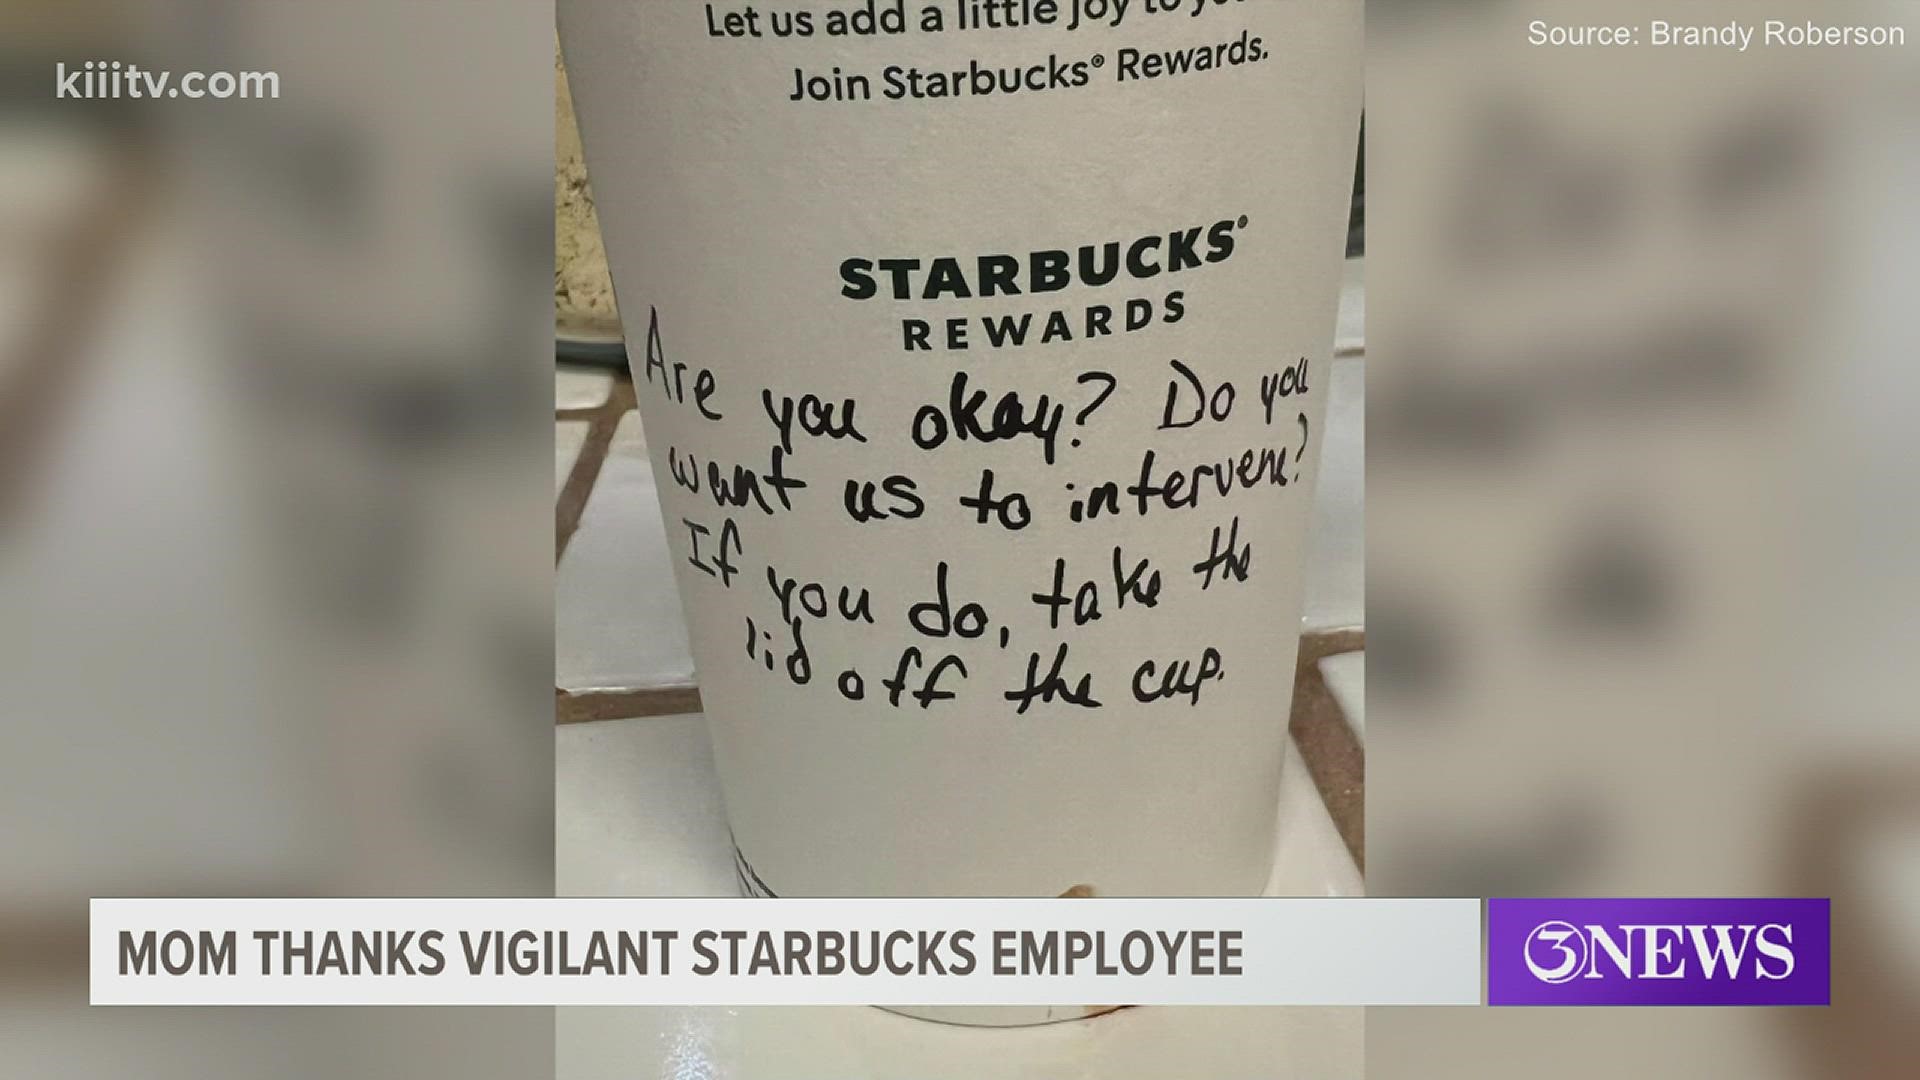 Baristas gave the girl a cup that said "Are you okay? Do you want us to intervene? If you do, take the lid off the cup" after noticing a man was hovering around her.